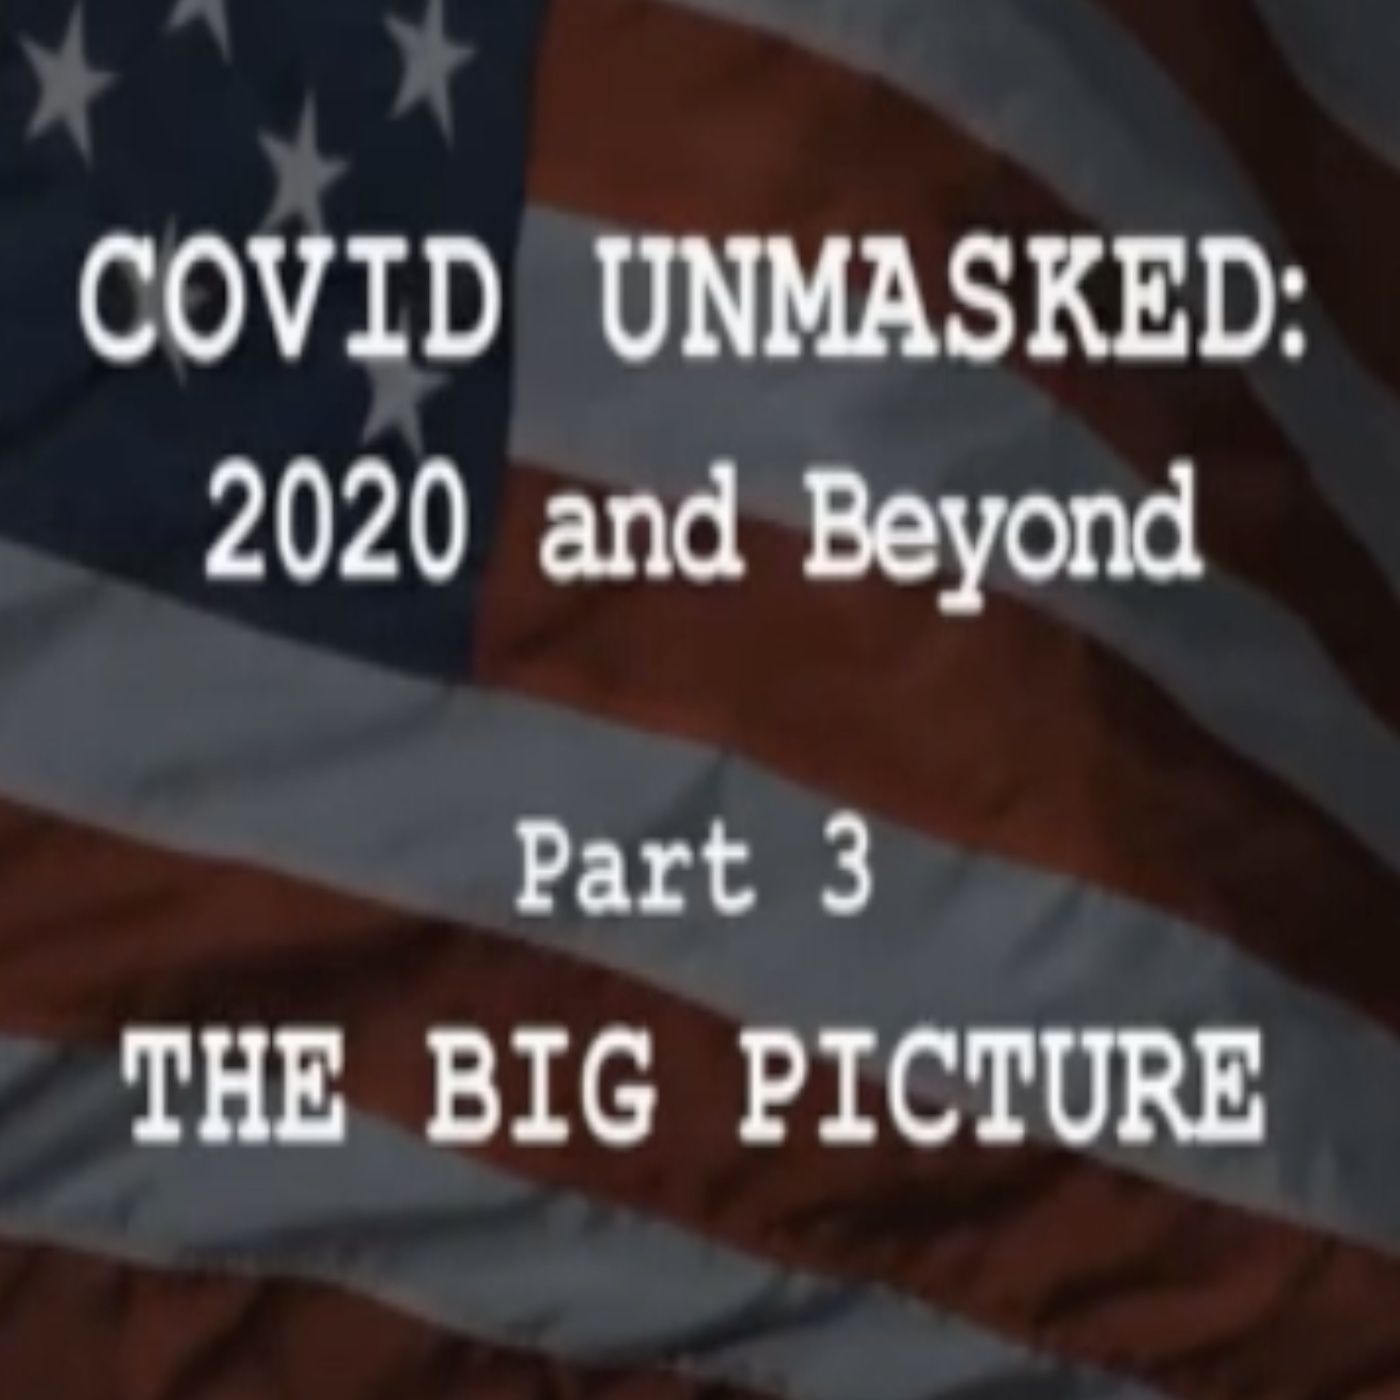 Covid Unmasked part 3 